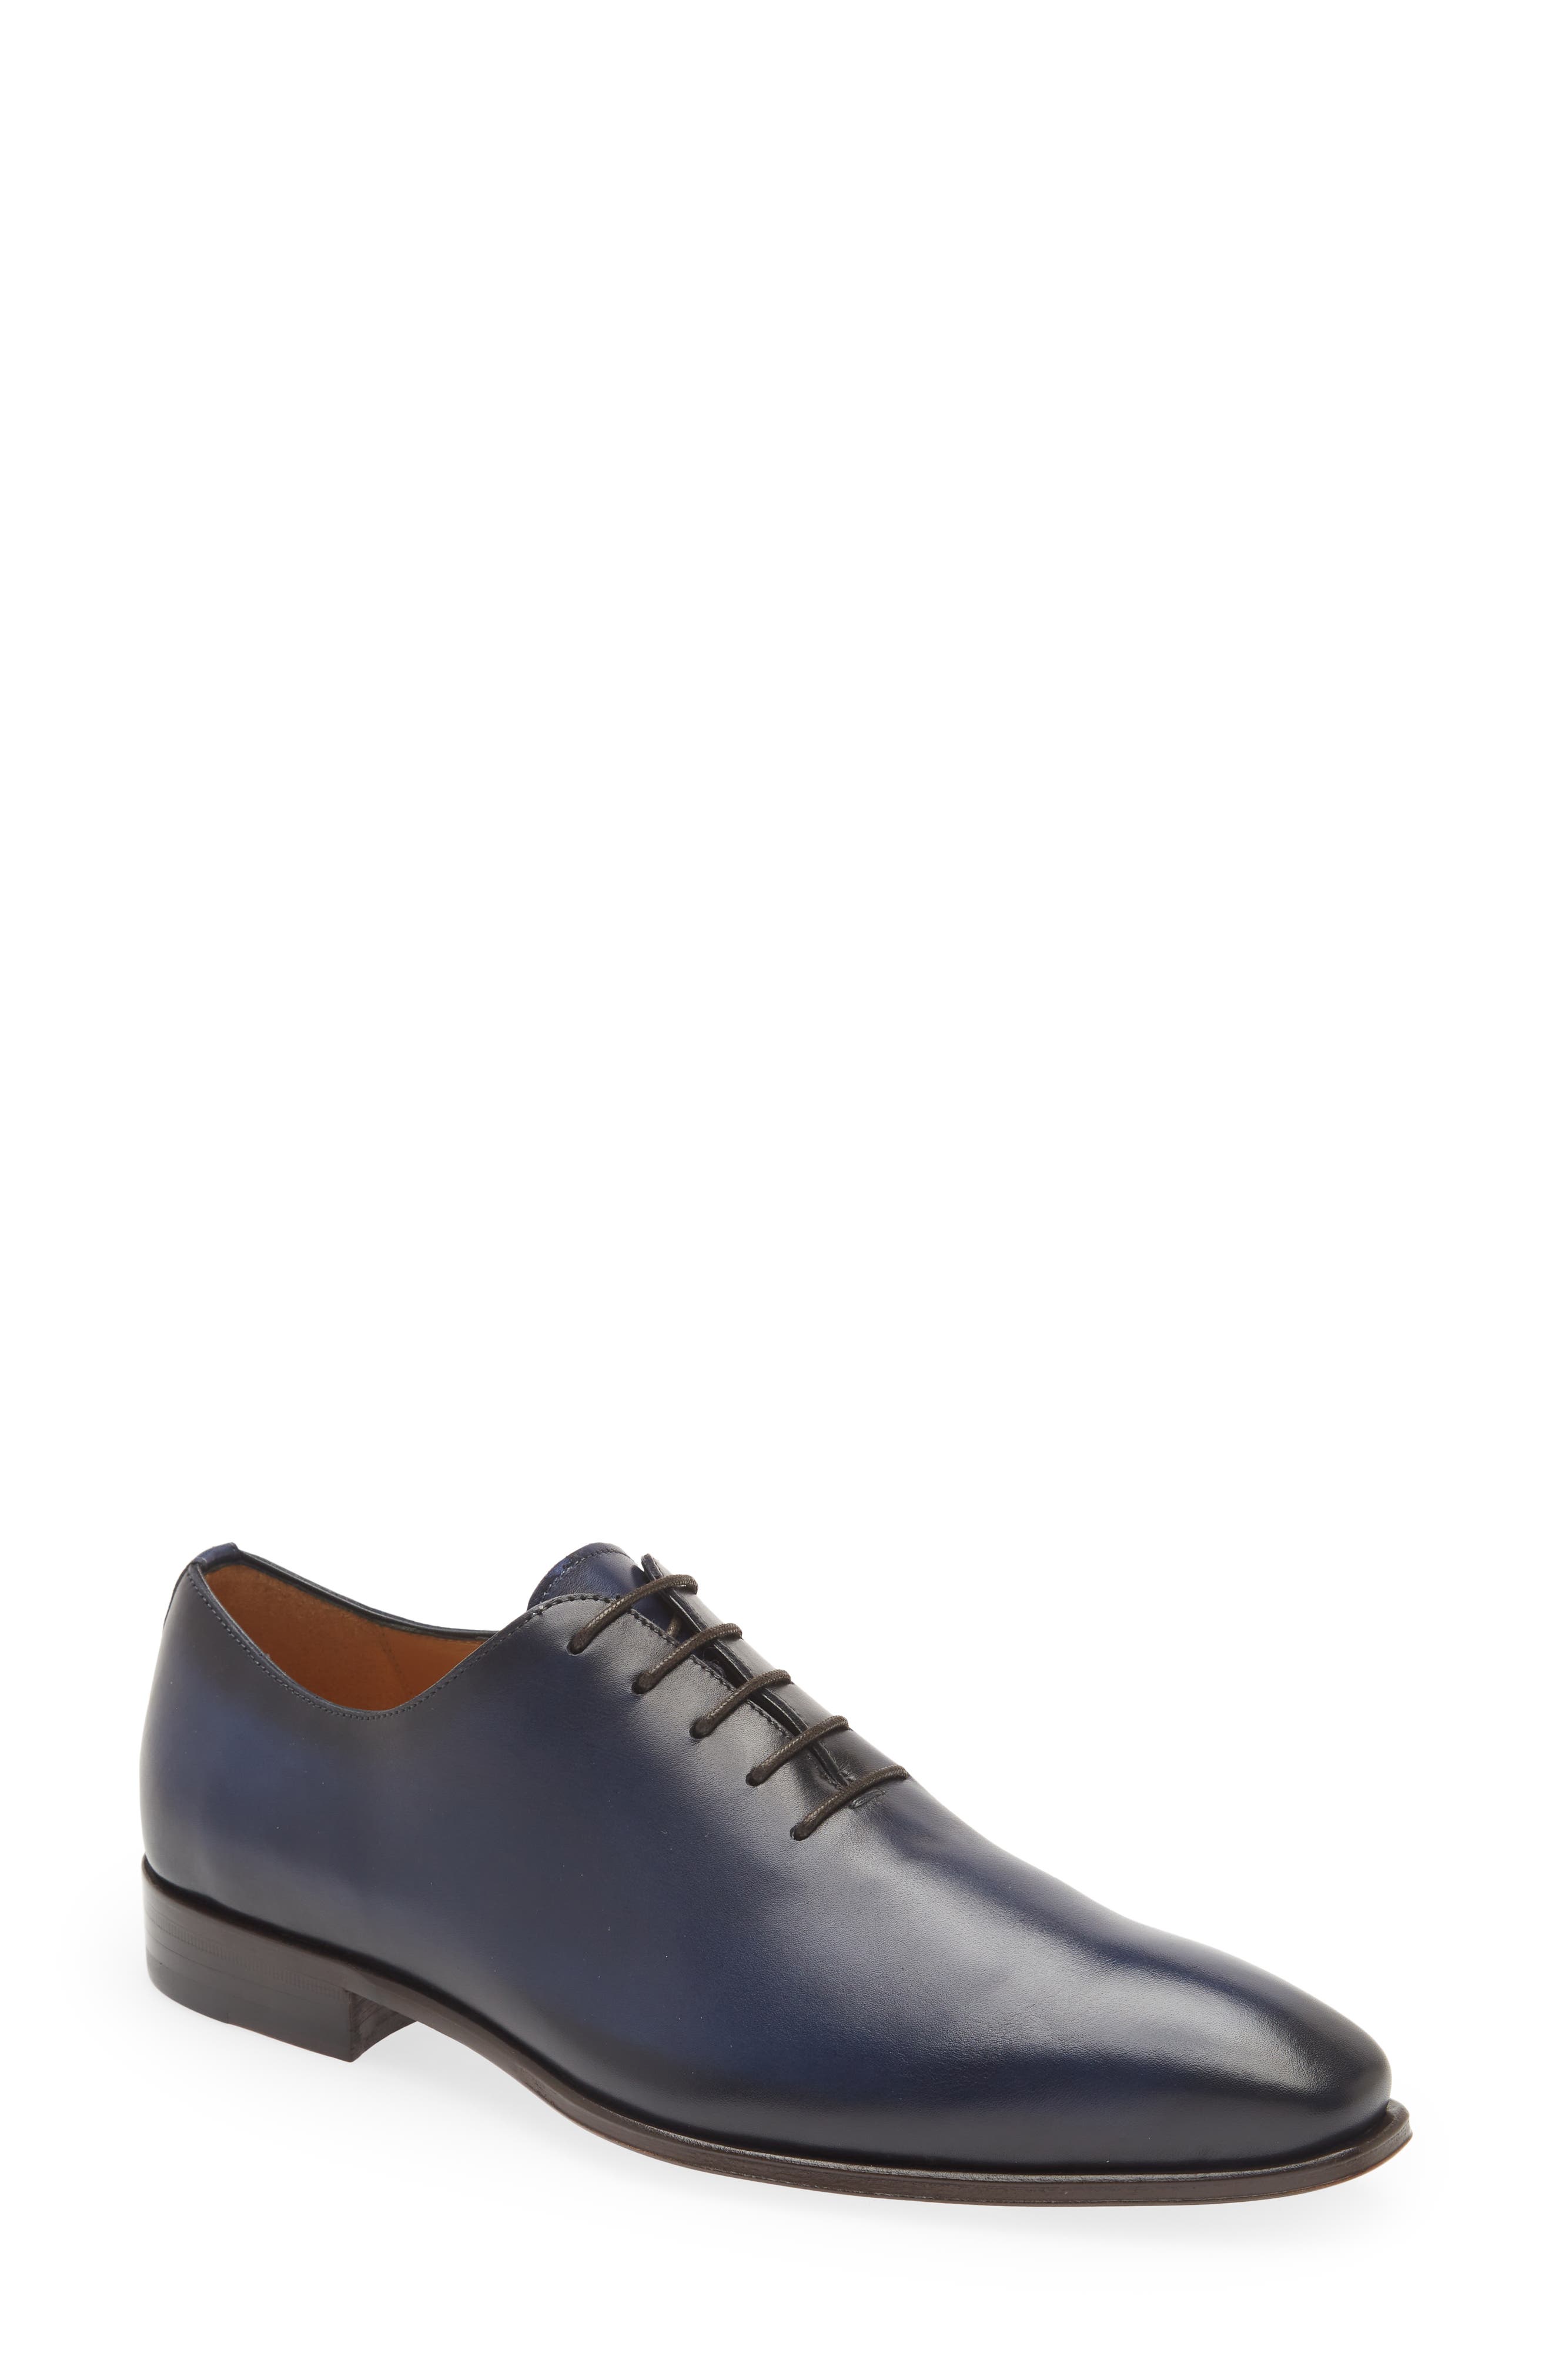 Mens Shoes Lace-ups Oxford shoes for Men Tods Leather Lace-up Shoes in Slate Blue Blue 